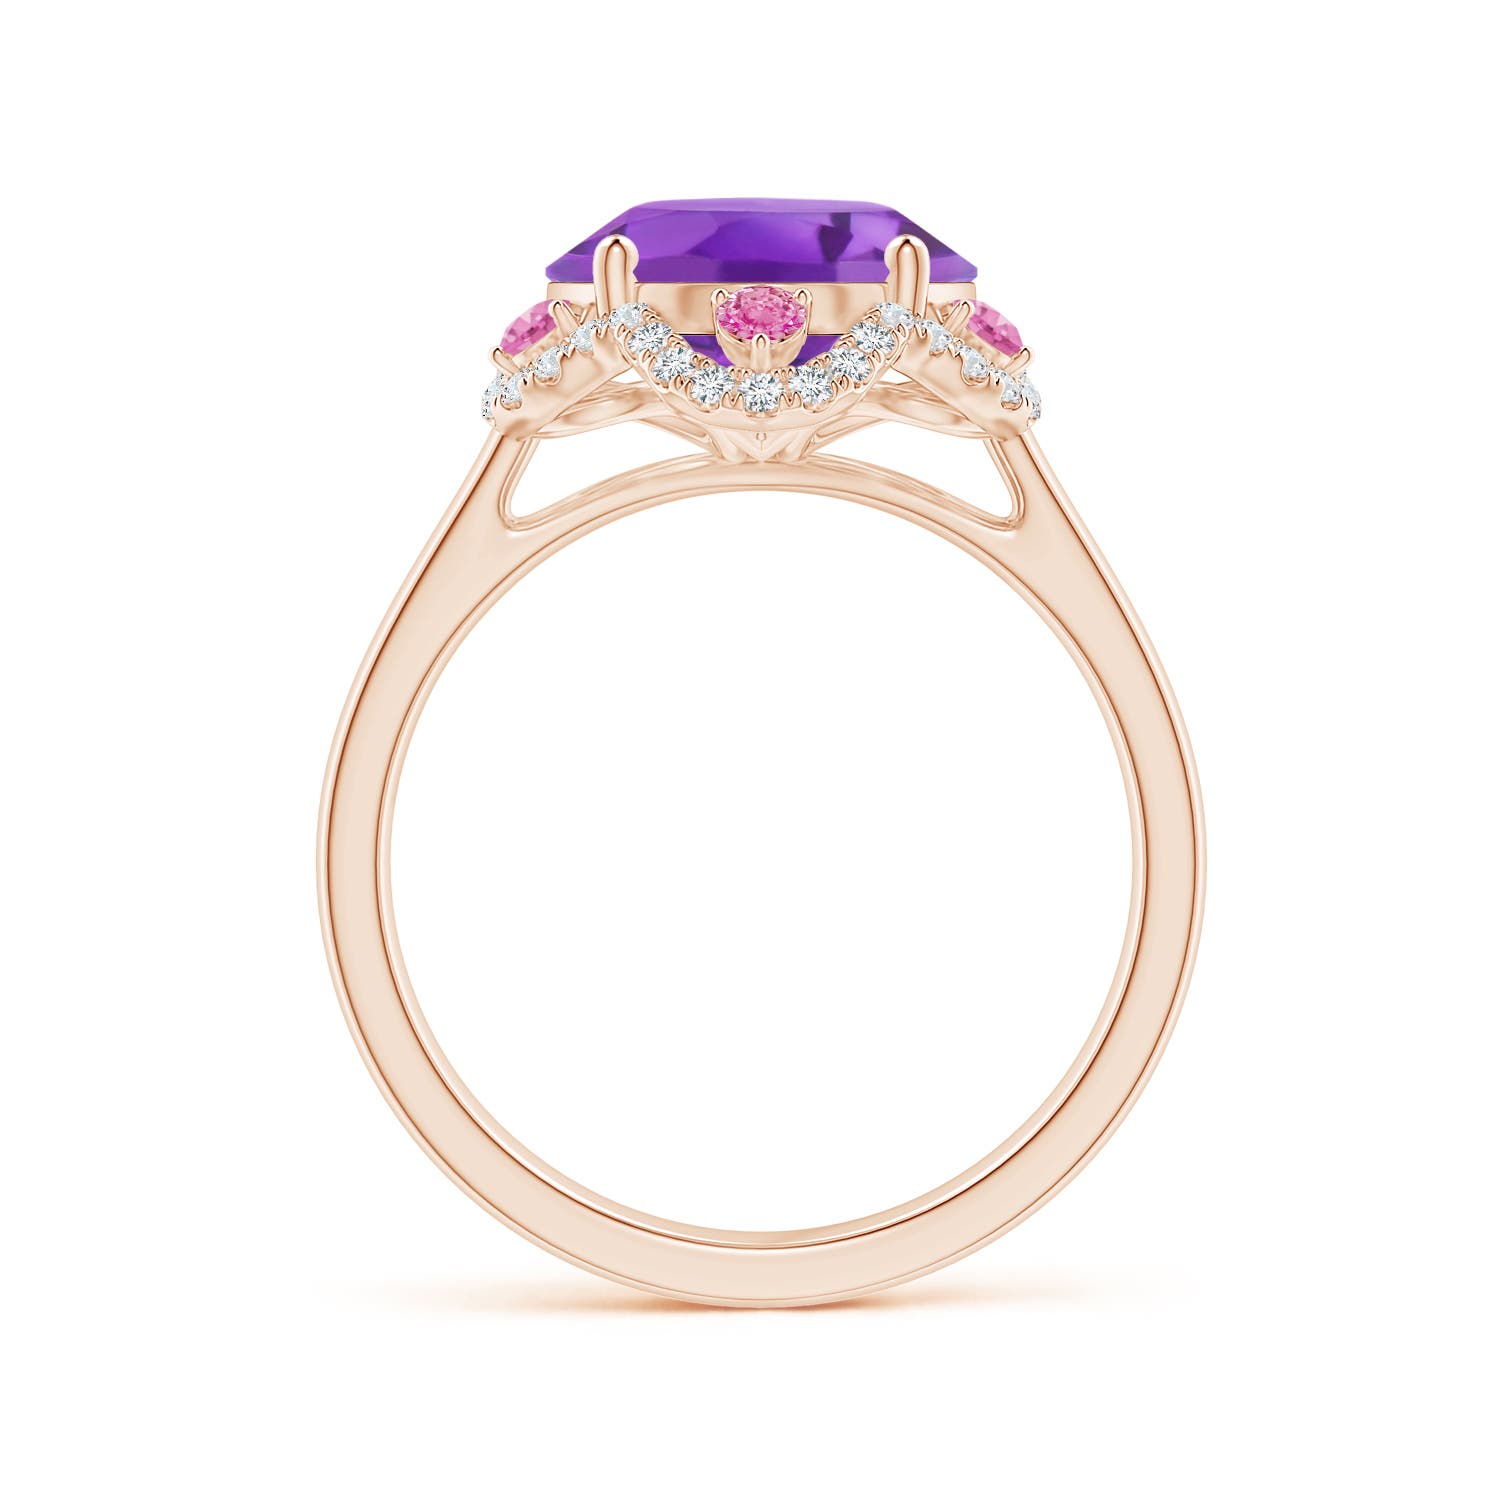 AA - Amethyst / 4.76 CT / 14 KT Rose Gold